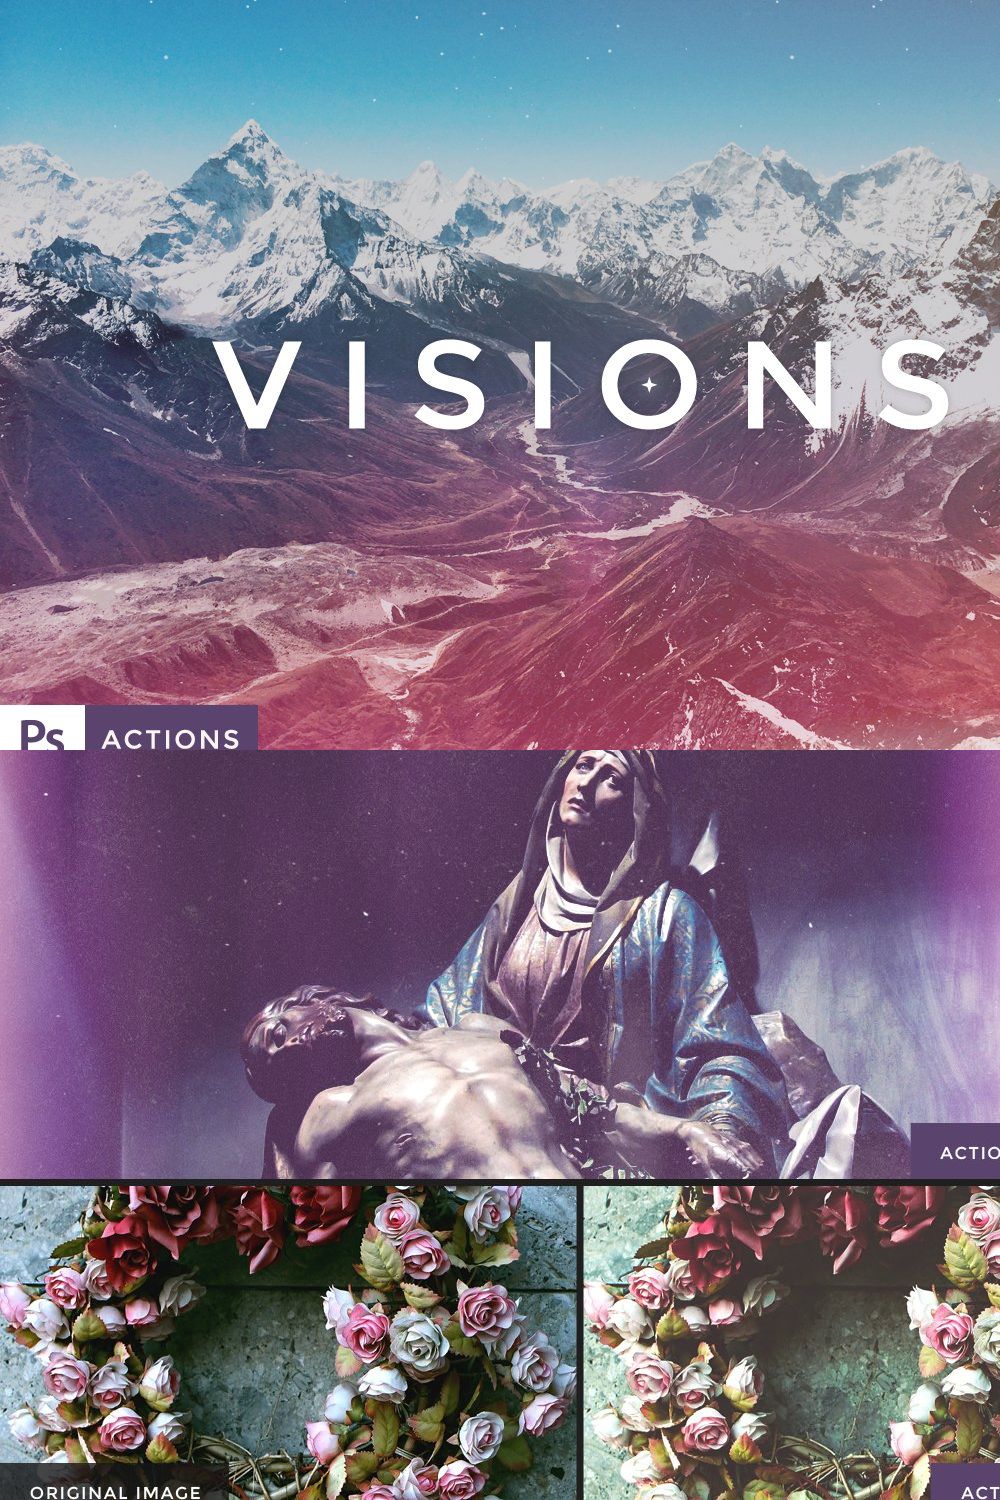 VISIONS Actions and Texture Set 2 pinterest preview image.